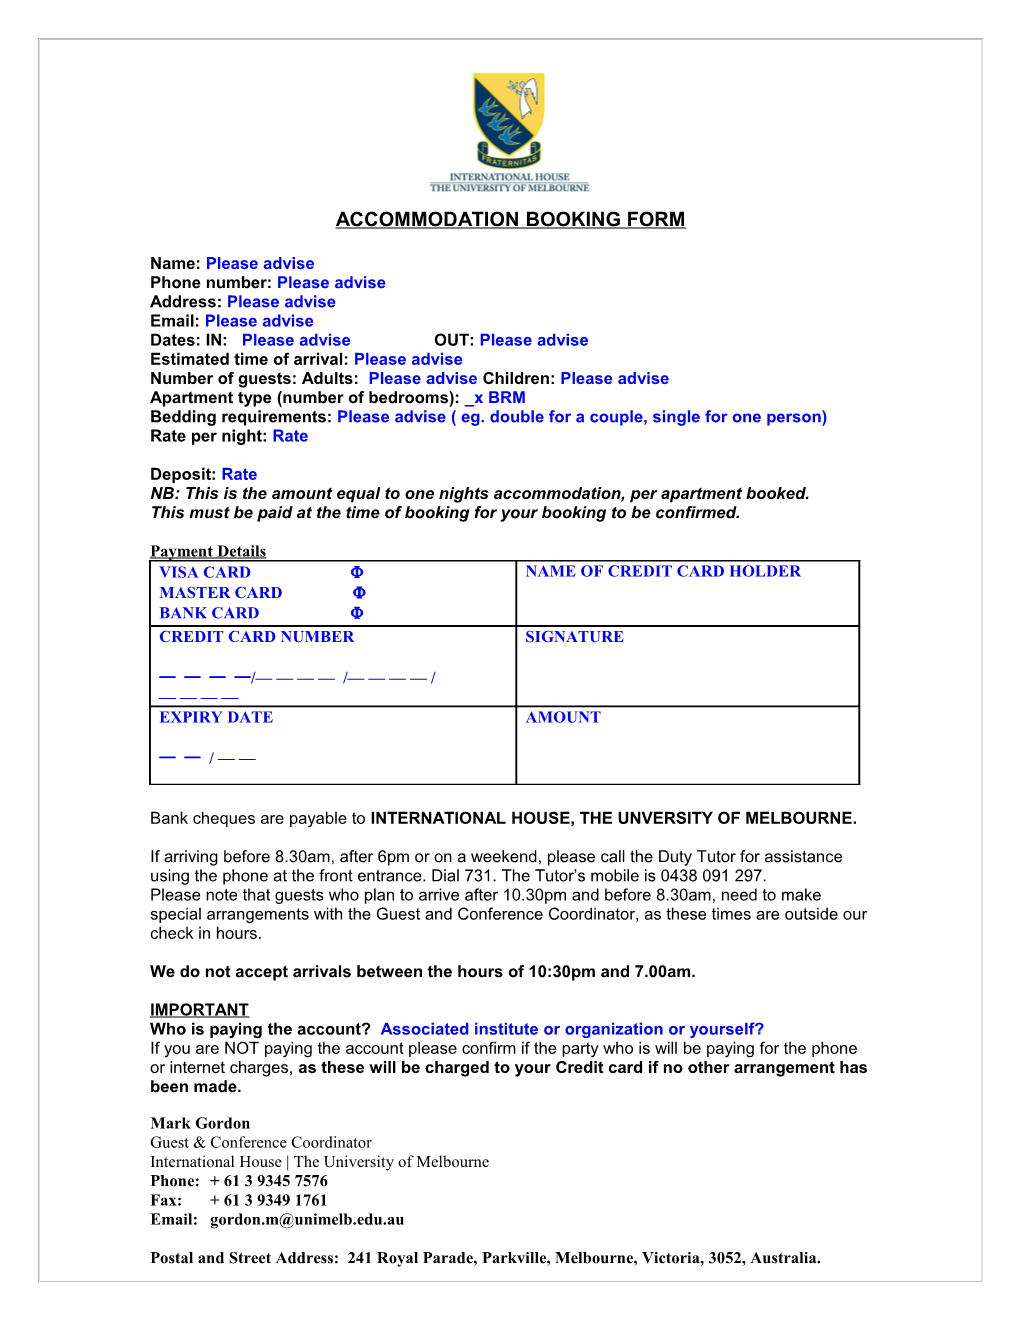 Accommodation Booking Form s1